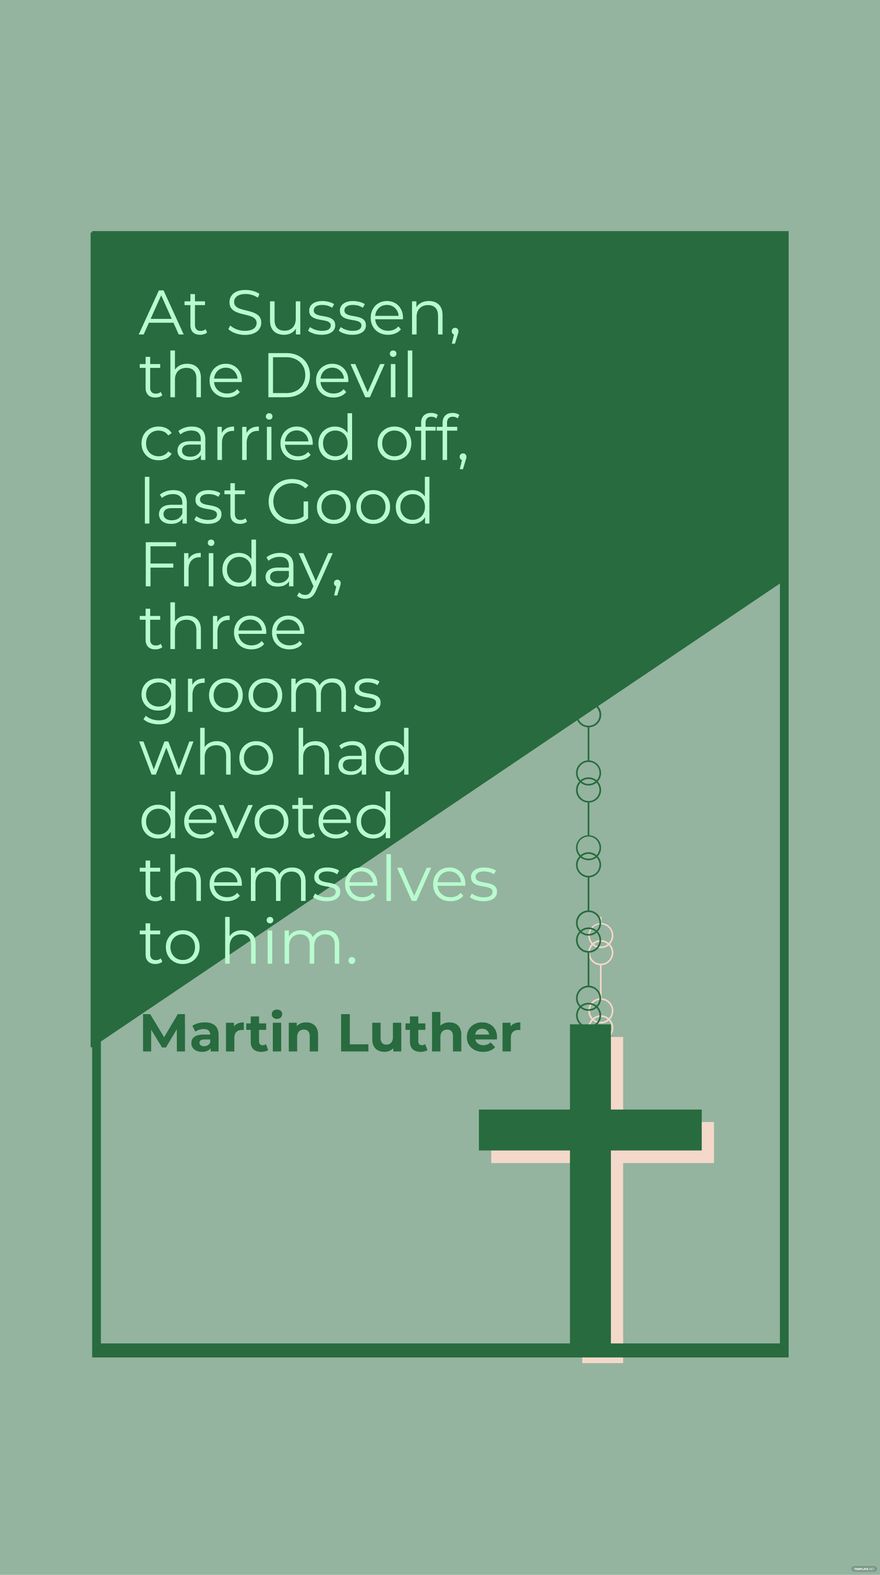 Free Martin Luther - At Sussen, the Devil carried off, last Good Friday, three grooms who had devoted themselves to him. in JPG